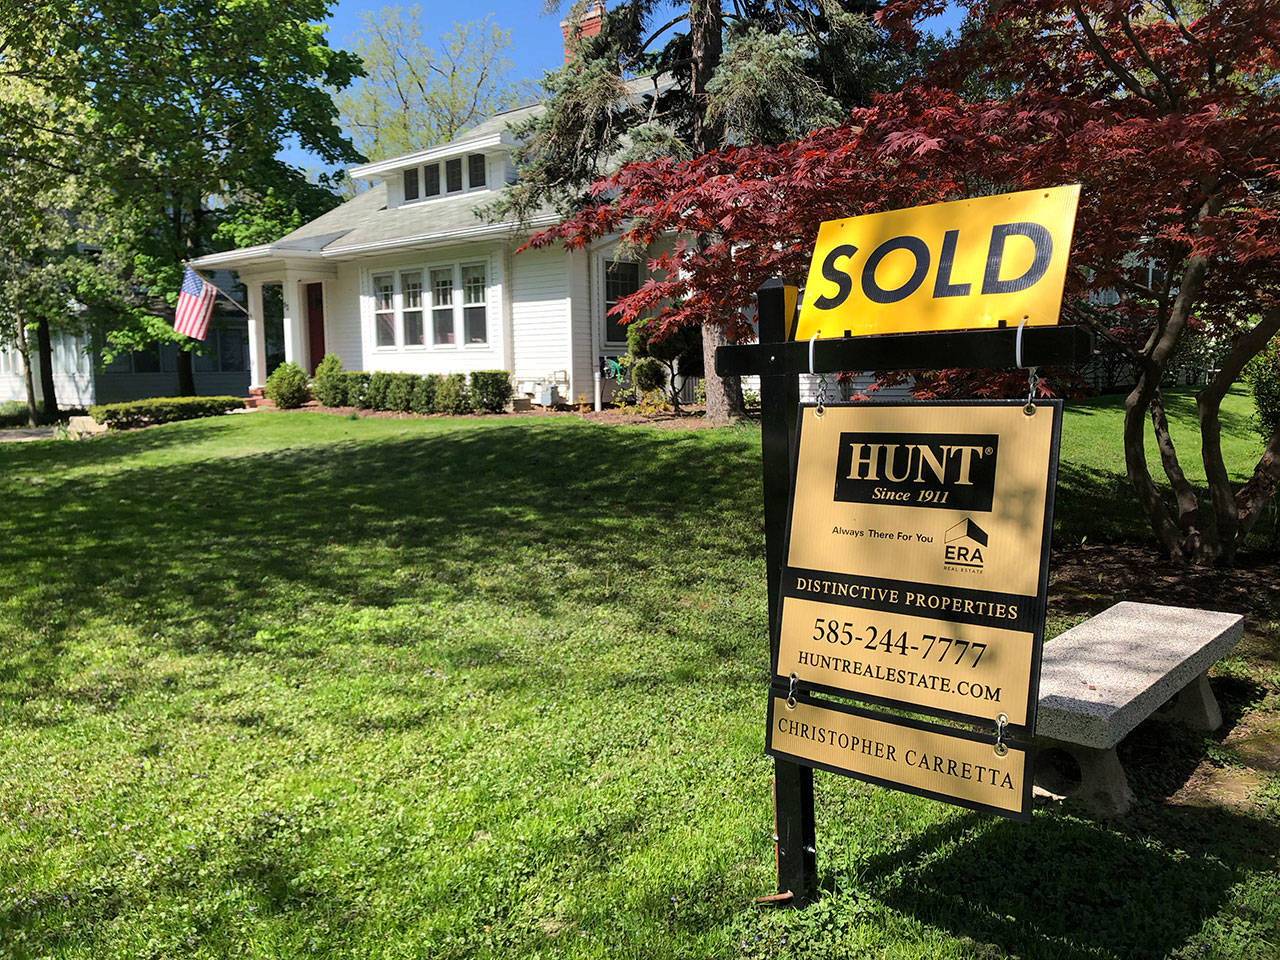 This May 22, 2020, photo shows a sold sign in front of a house in Brighton, N.Y. On Thursday, May 28, long-term U.S. mortgage rates fell this week as the key 30-year home loan marked an all-time low for the third time in the last few months since the coronavirus outbreak took hold. Mortgage buyer Freddie Mac reports that the average rate on the 30-year loan tumbled to 3.15 percent from 3.24 percent last week. (Ted Shaffrey/Associated Press)